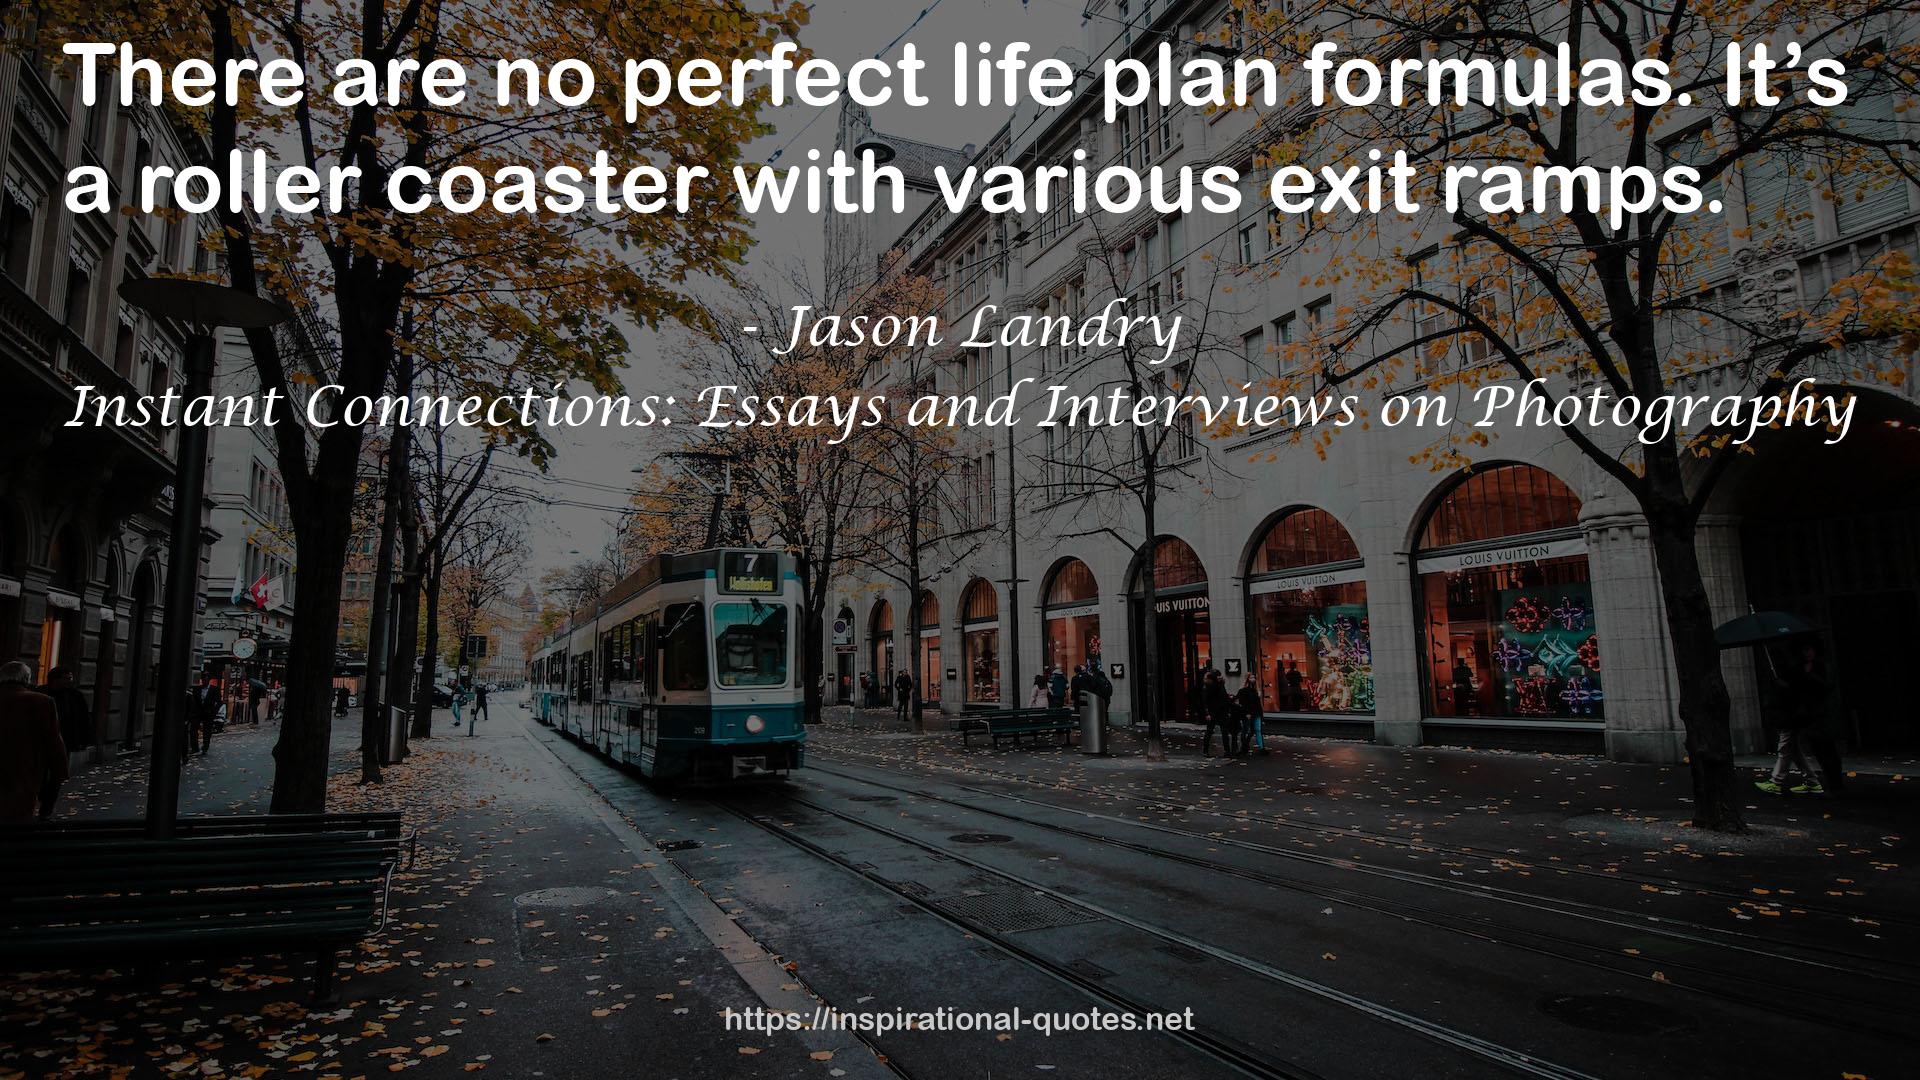 Instant Connections: Essays and Interviews on Photography QUOTES